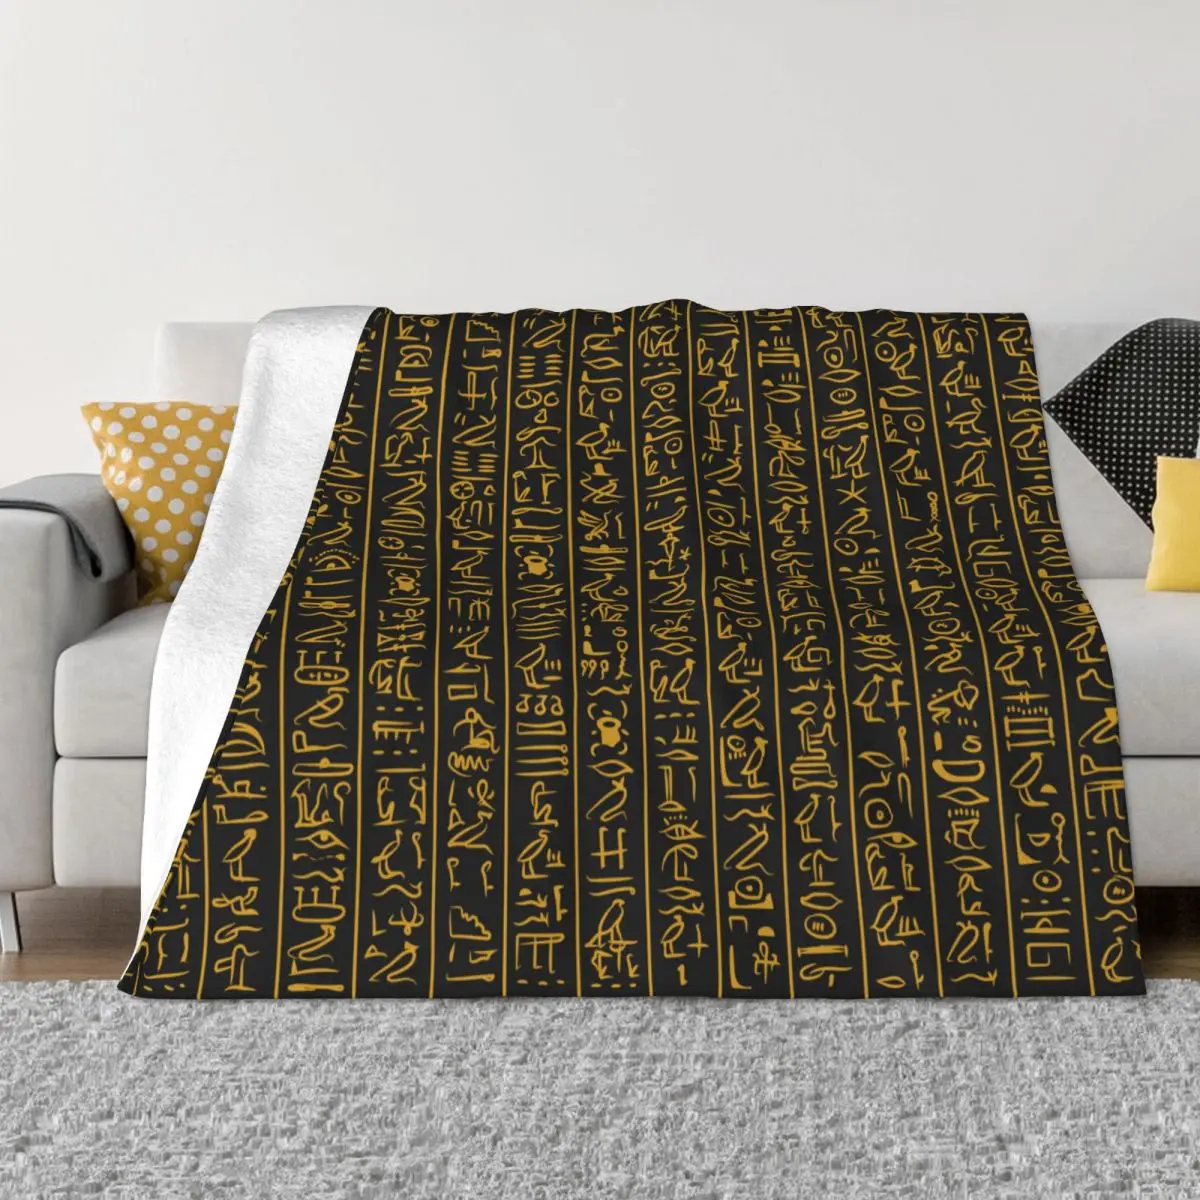 

Ancient Egypt Mysterious Fuzzy Blanket Egyptian Symbol Awesome Throw Blanket for Bed Sofa Couch 150*125cm Bedspread